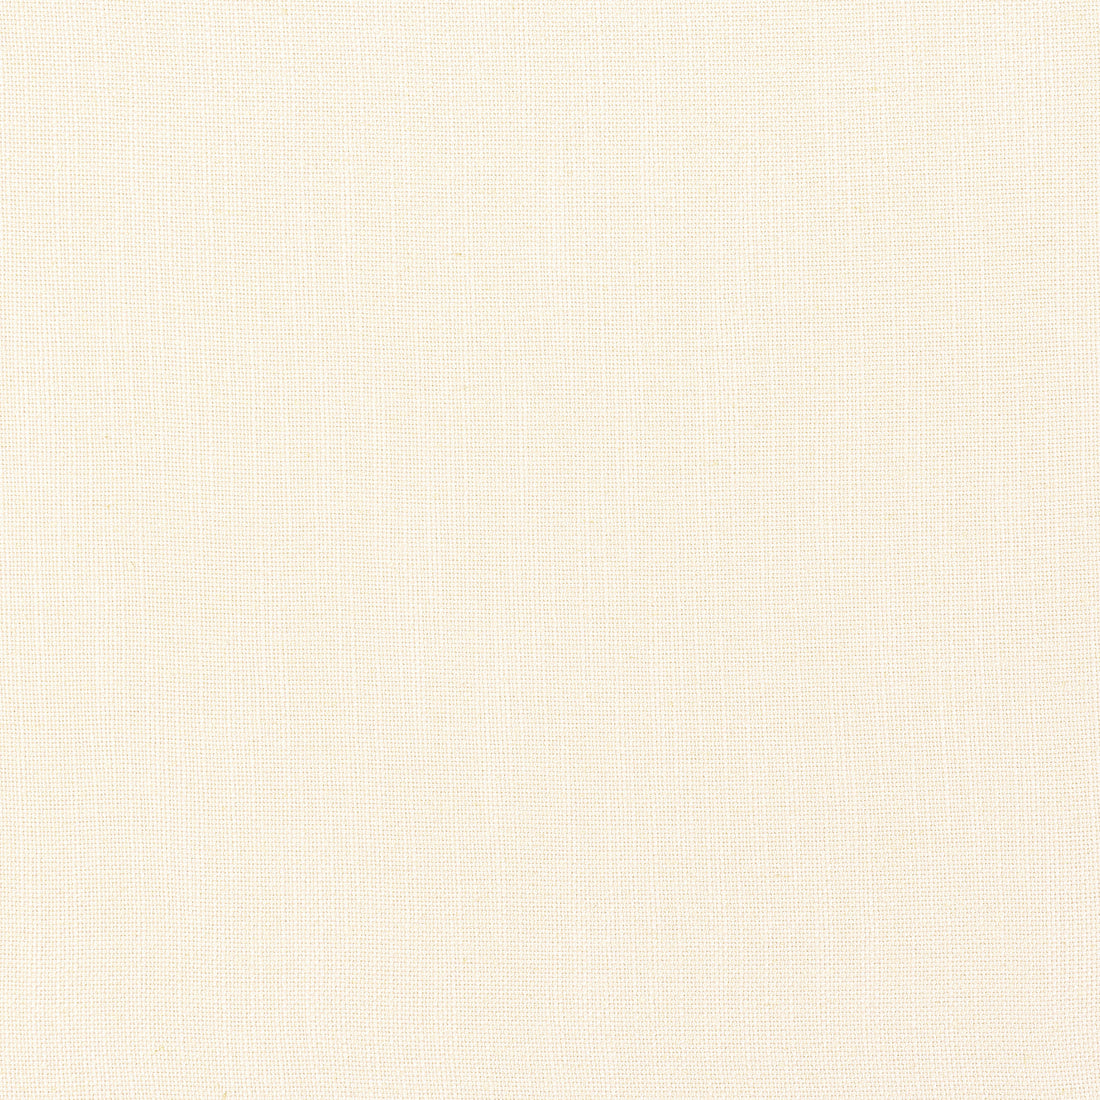 Palisade Linen fabric in ivory color - pattern number FWW7625 - by Thibaut in the Palisades collection